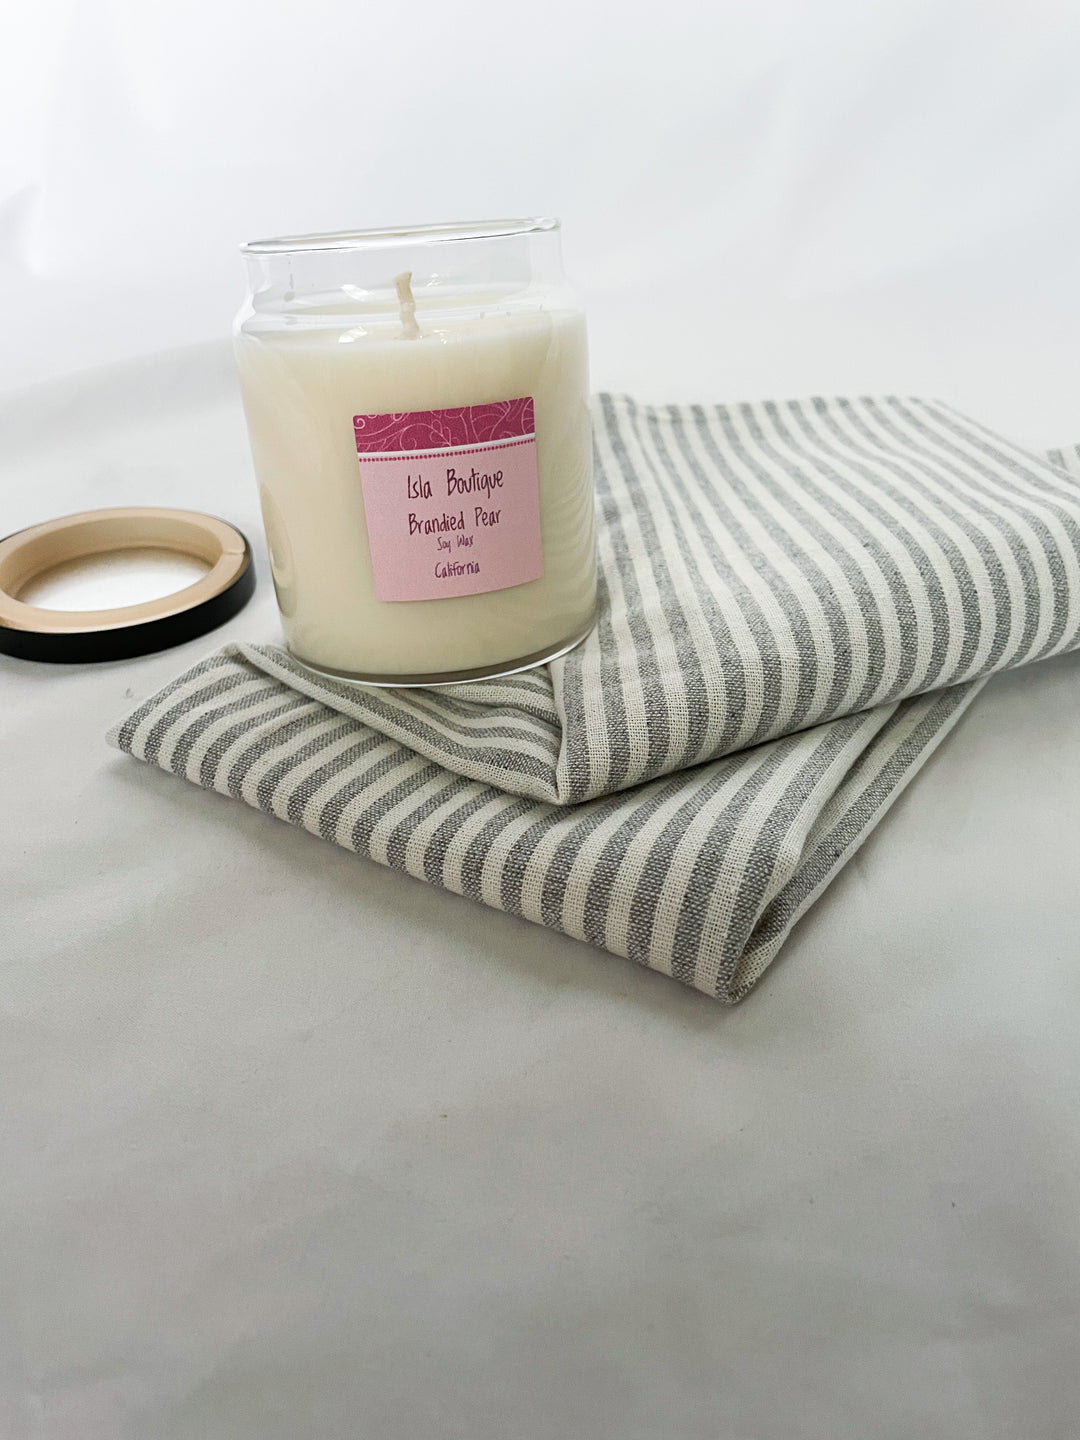 brandied pear scented soy candle with grey and white stripped tea towel